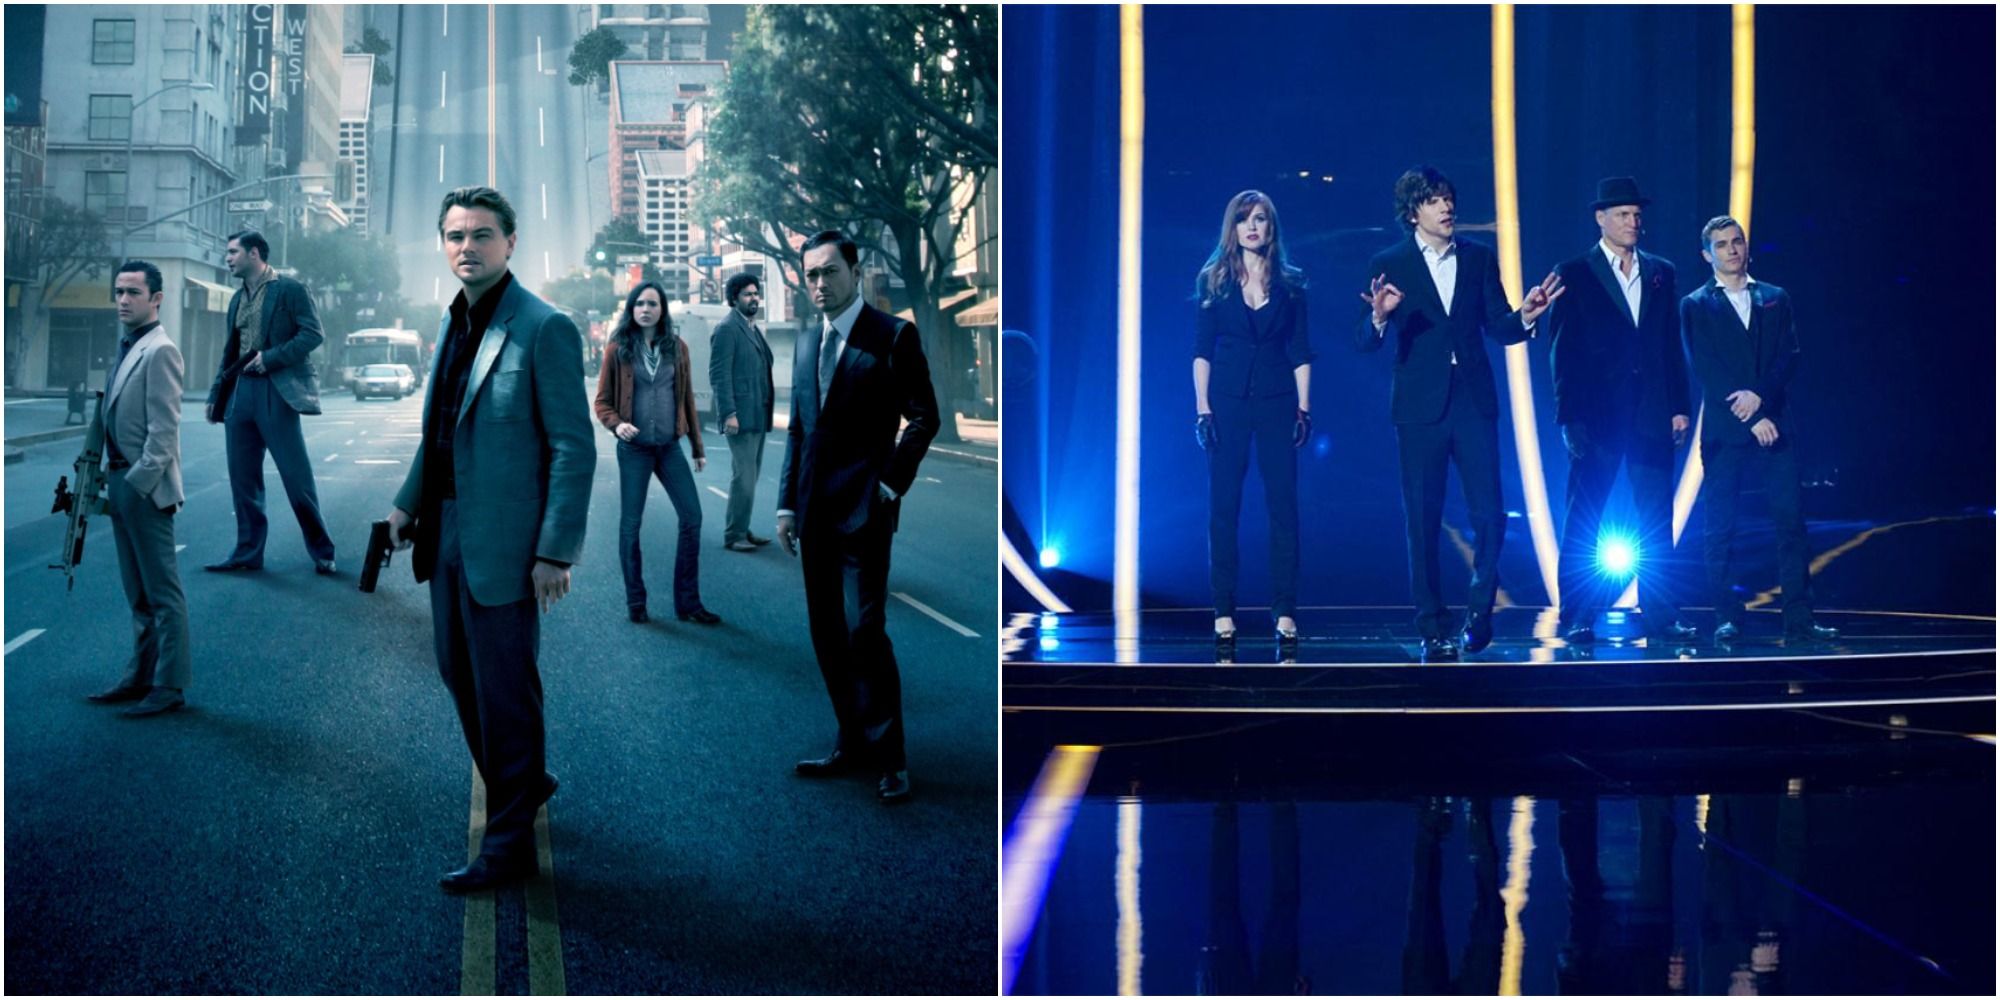 Now You See Me 3: Everything We Know So Far About The Next Four Horsemen  Heist